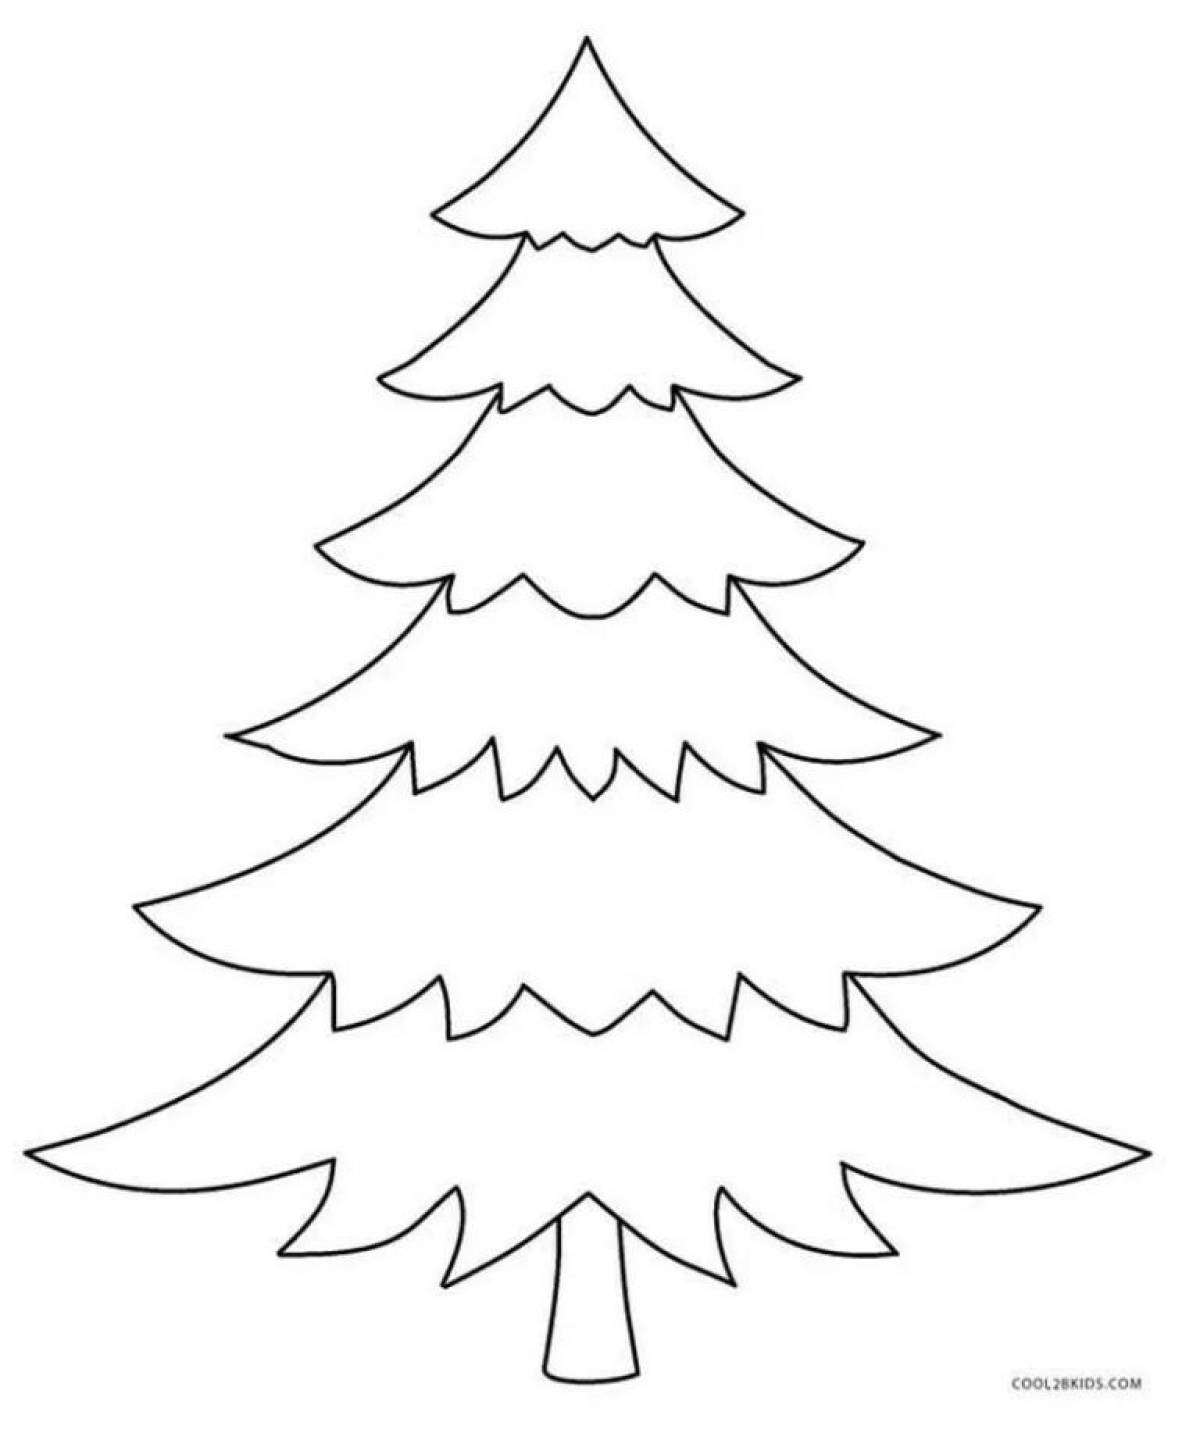 Splendorous coloring page christmas tree template